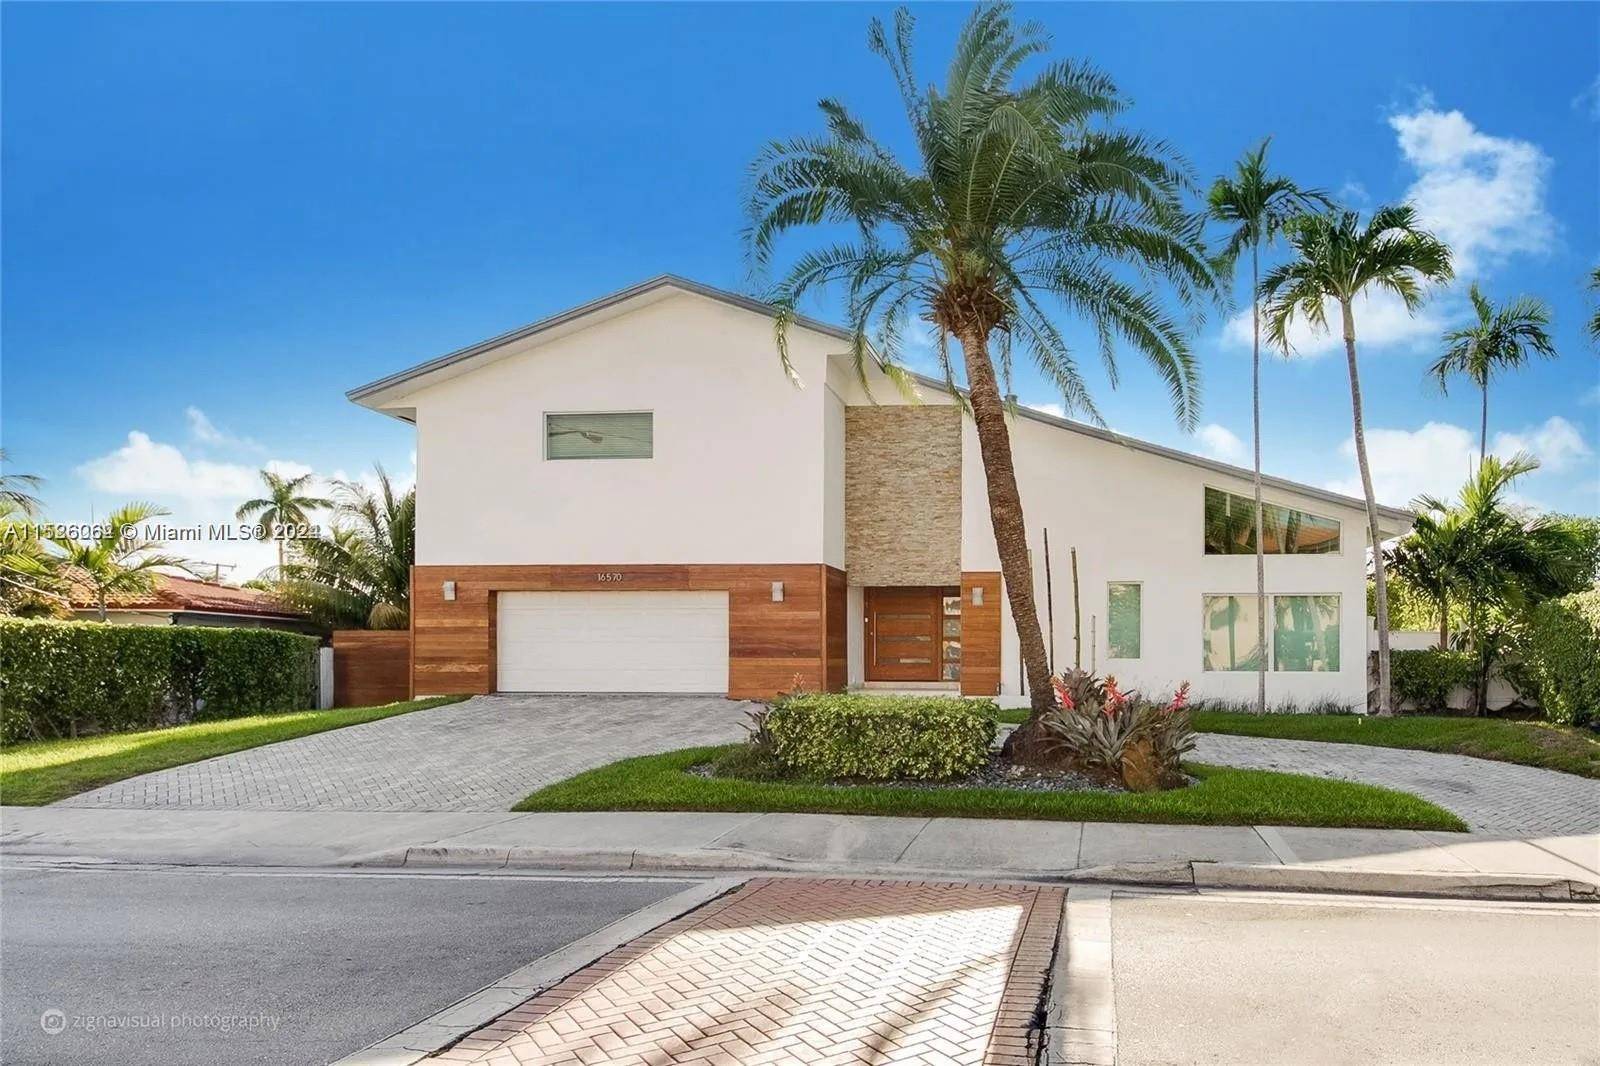 Gorgeous modern 4 bedroom 4 bath waterfront home in desirable Eastern Shores community of Sunny Isles.